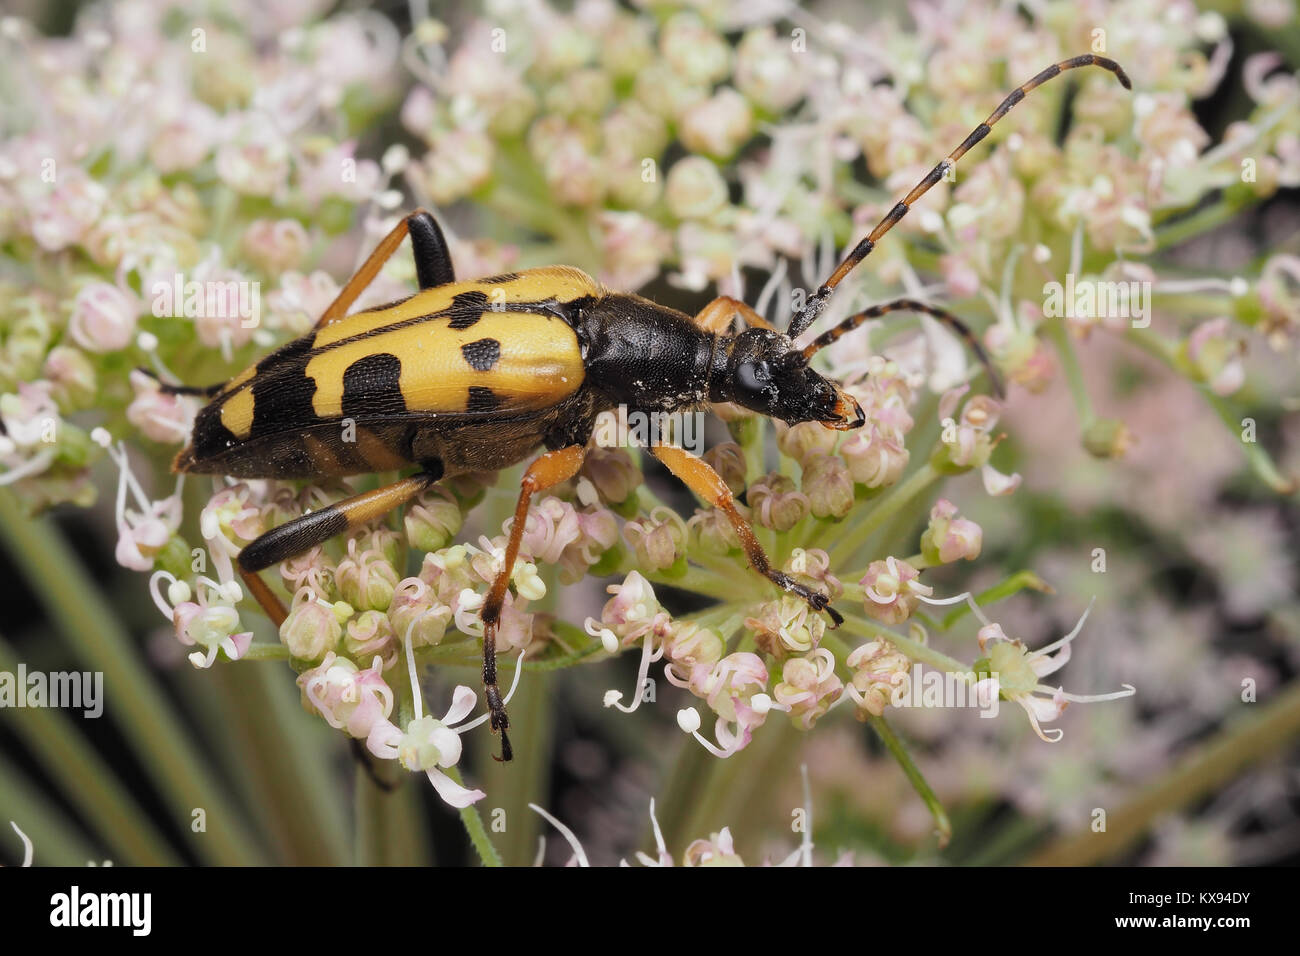 Black and Yellow Longhorn Beetle (Rutpela maculata) perched on an umbellifer flower. Cahir, Tipperary, Ireland. Stock Photo